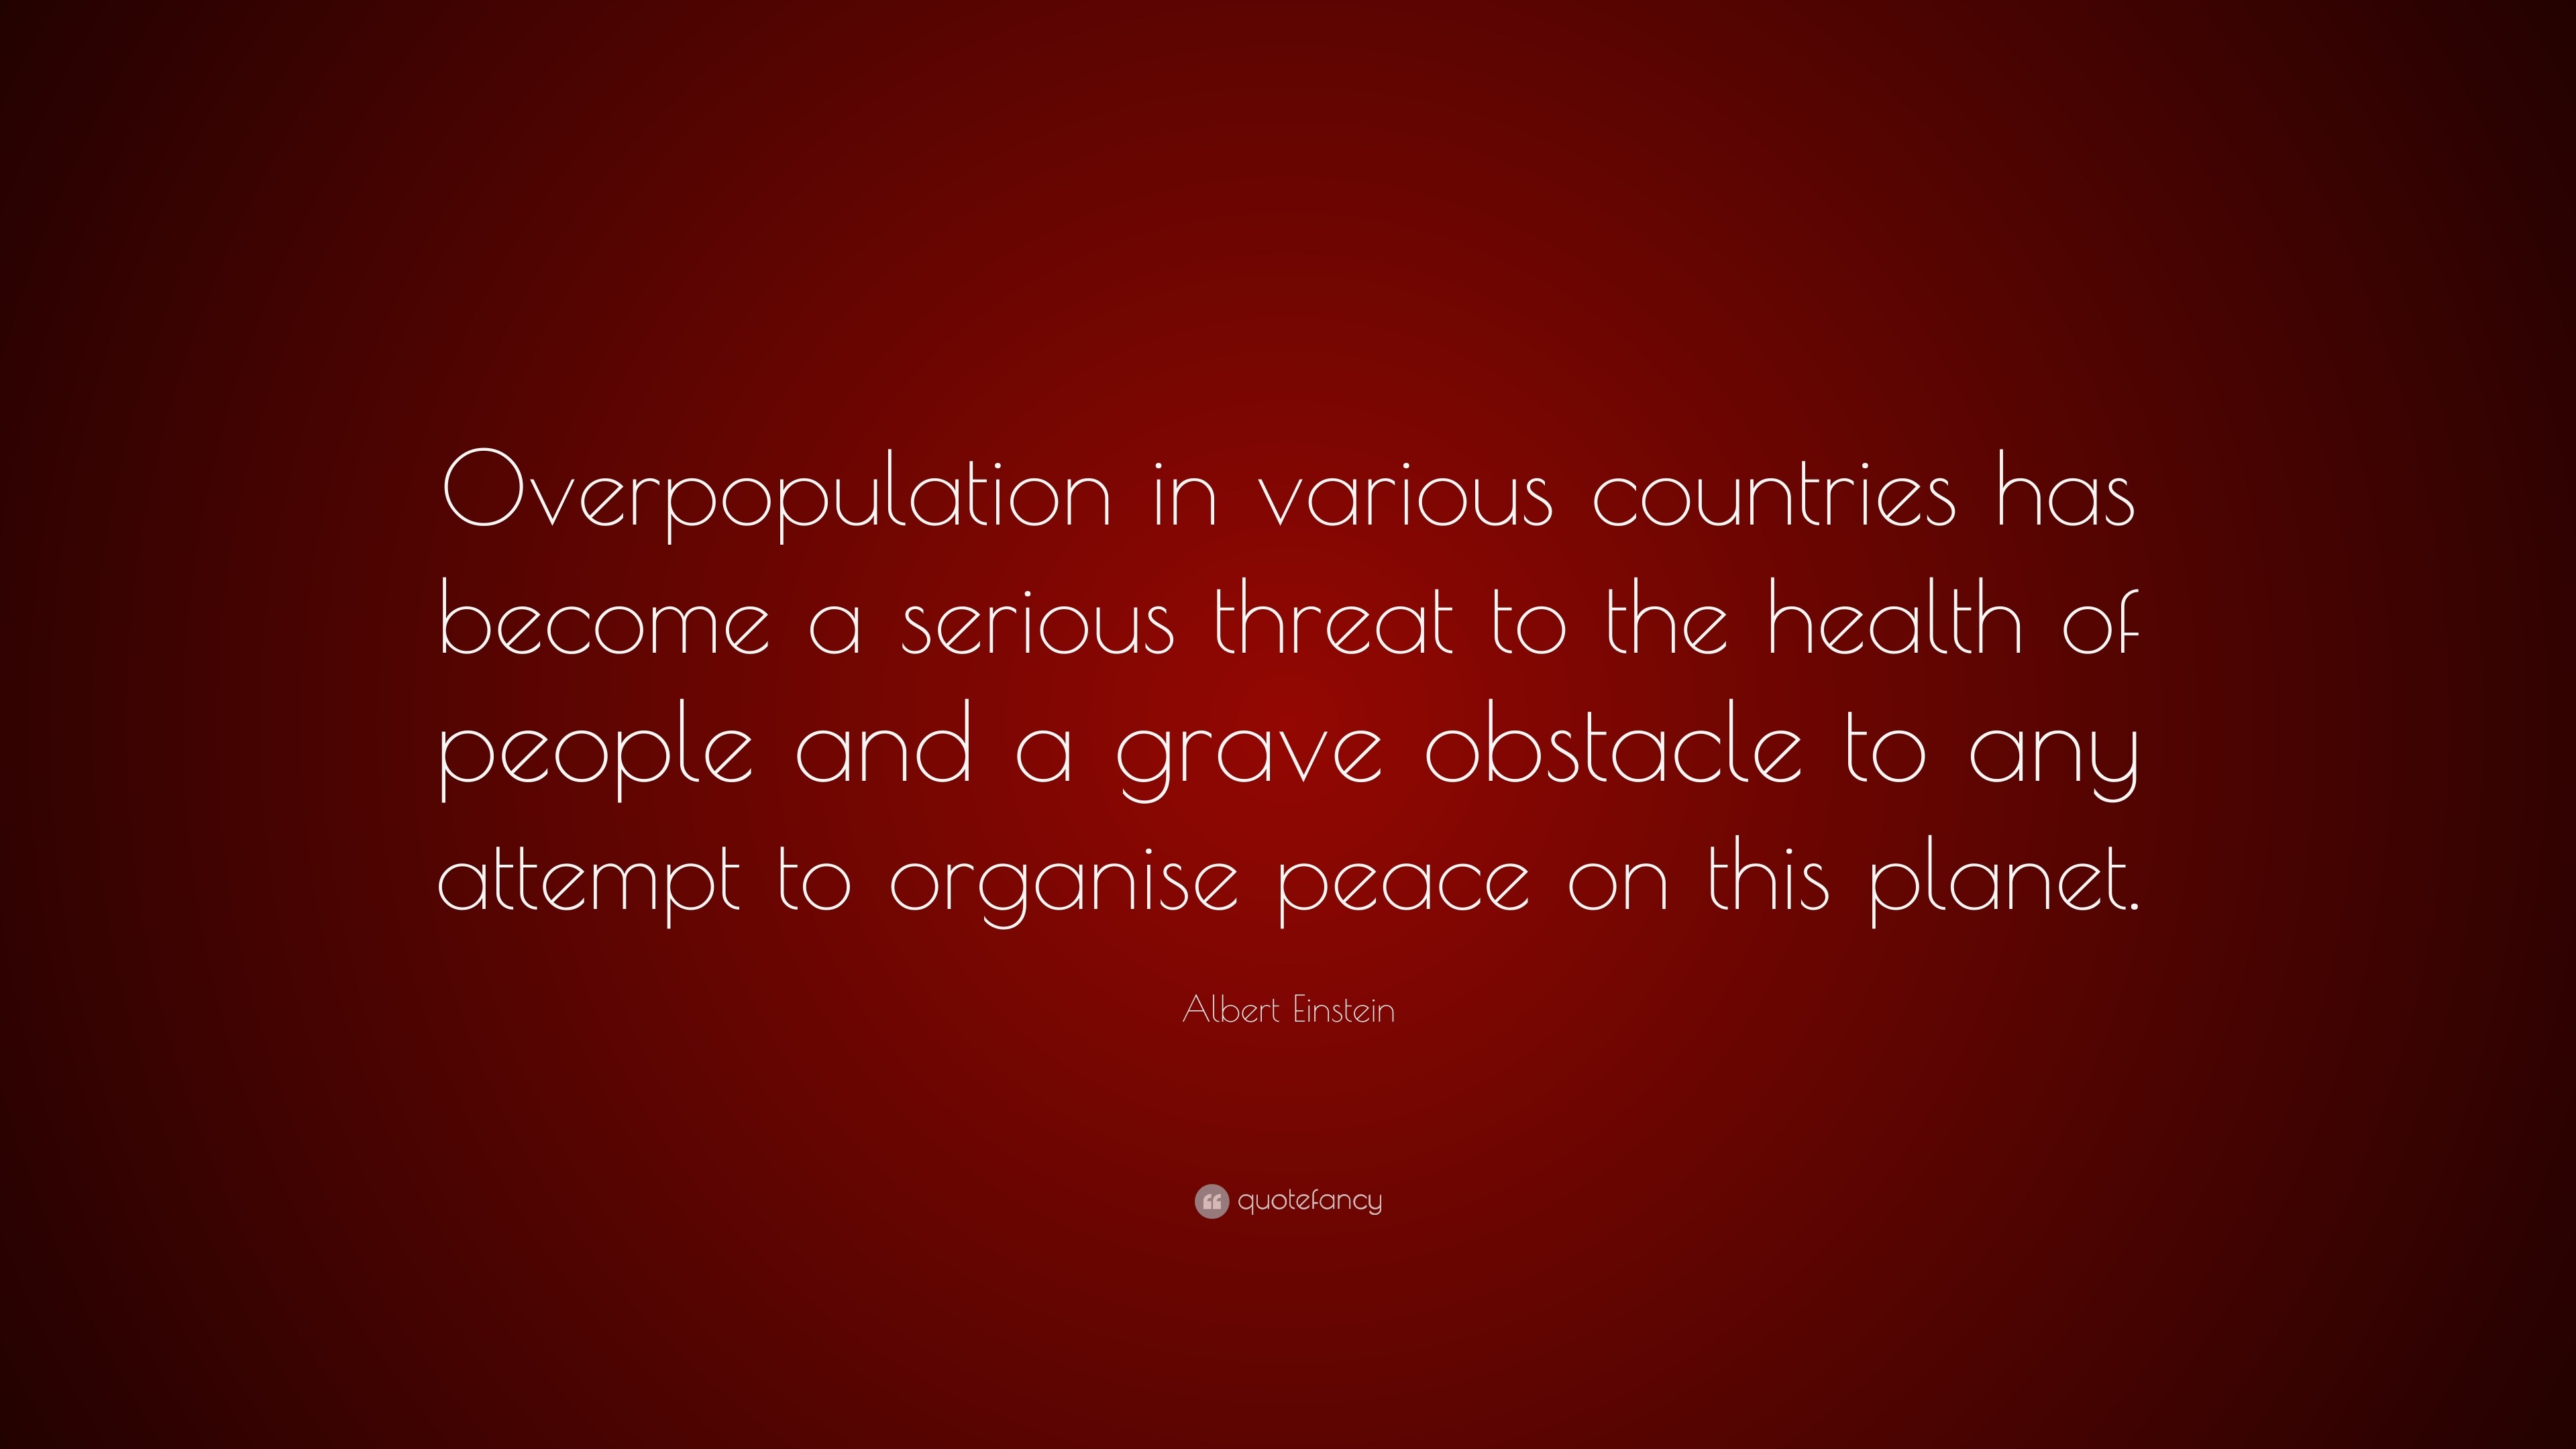 overpopulation quotes for essay